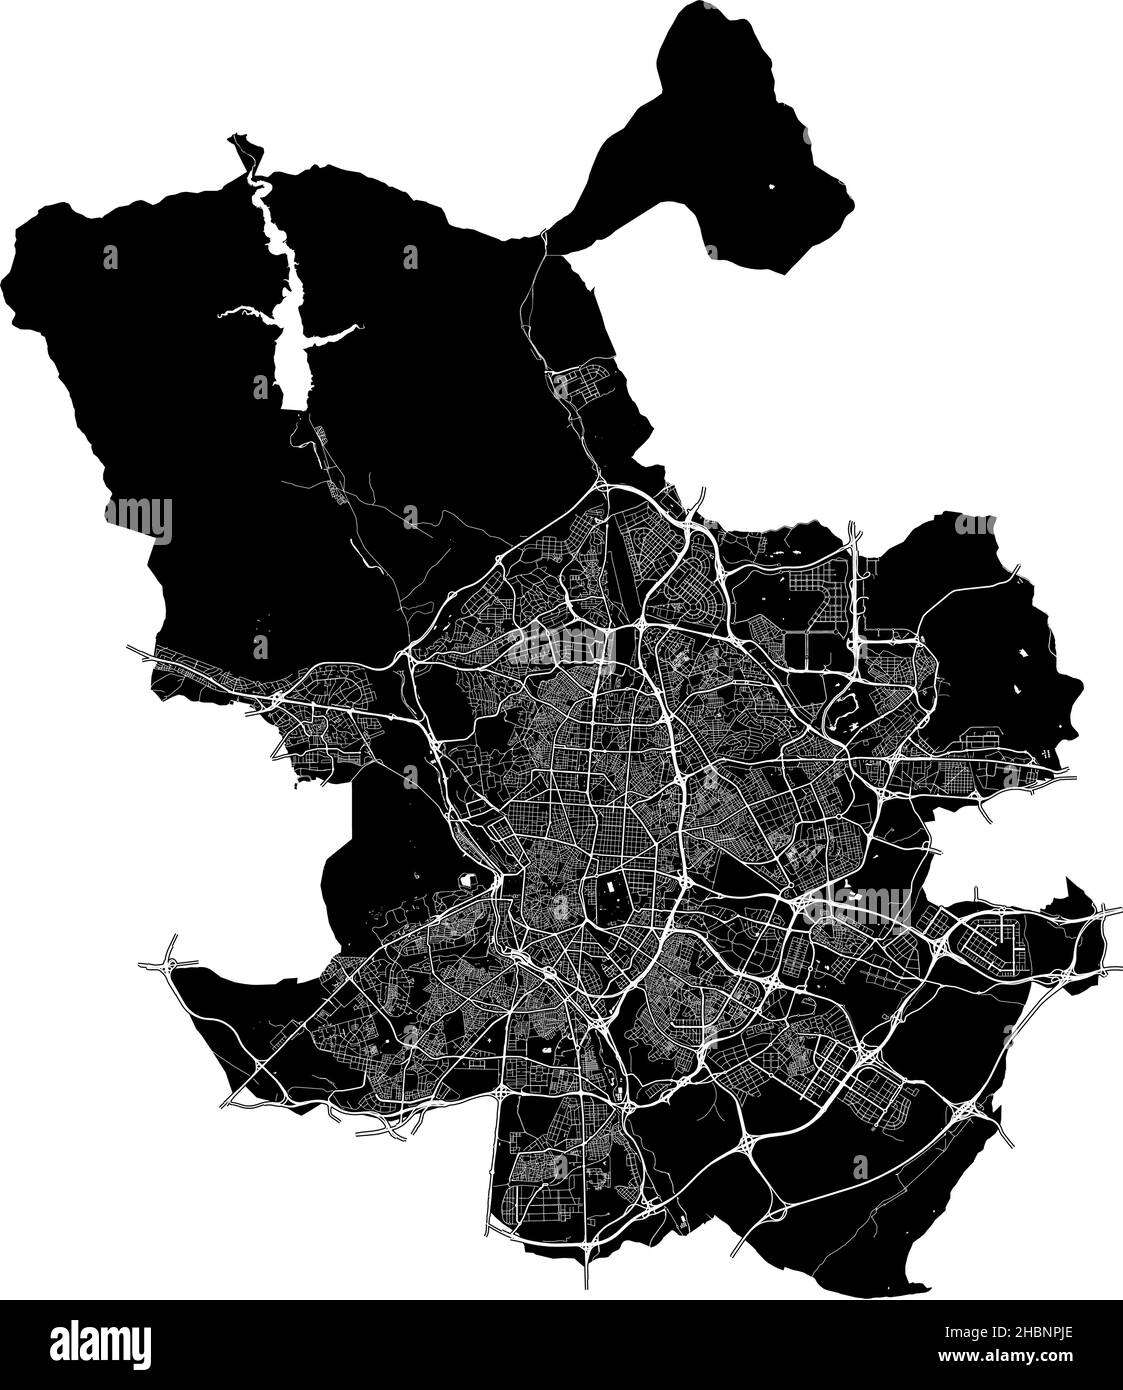 Madrid, Spain, high resolution vector map with city boundaries, and editable paths. The city map was drawn with white areas and lines for main roads, Stock Vector